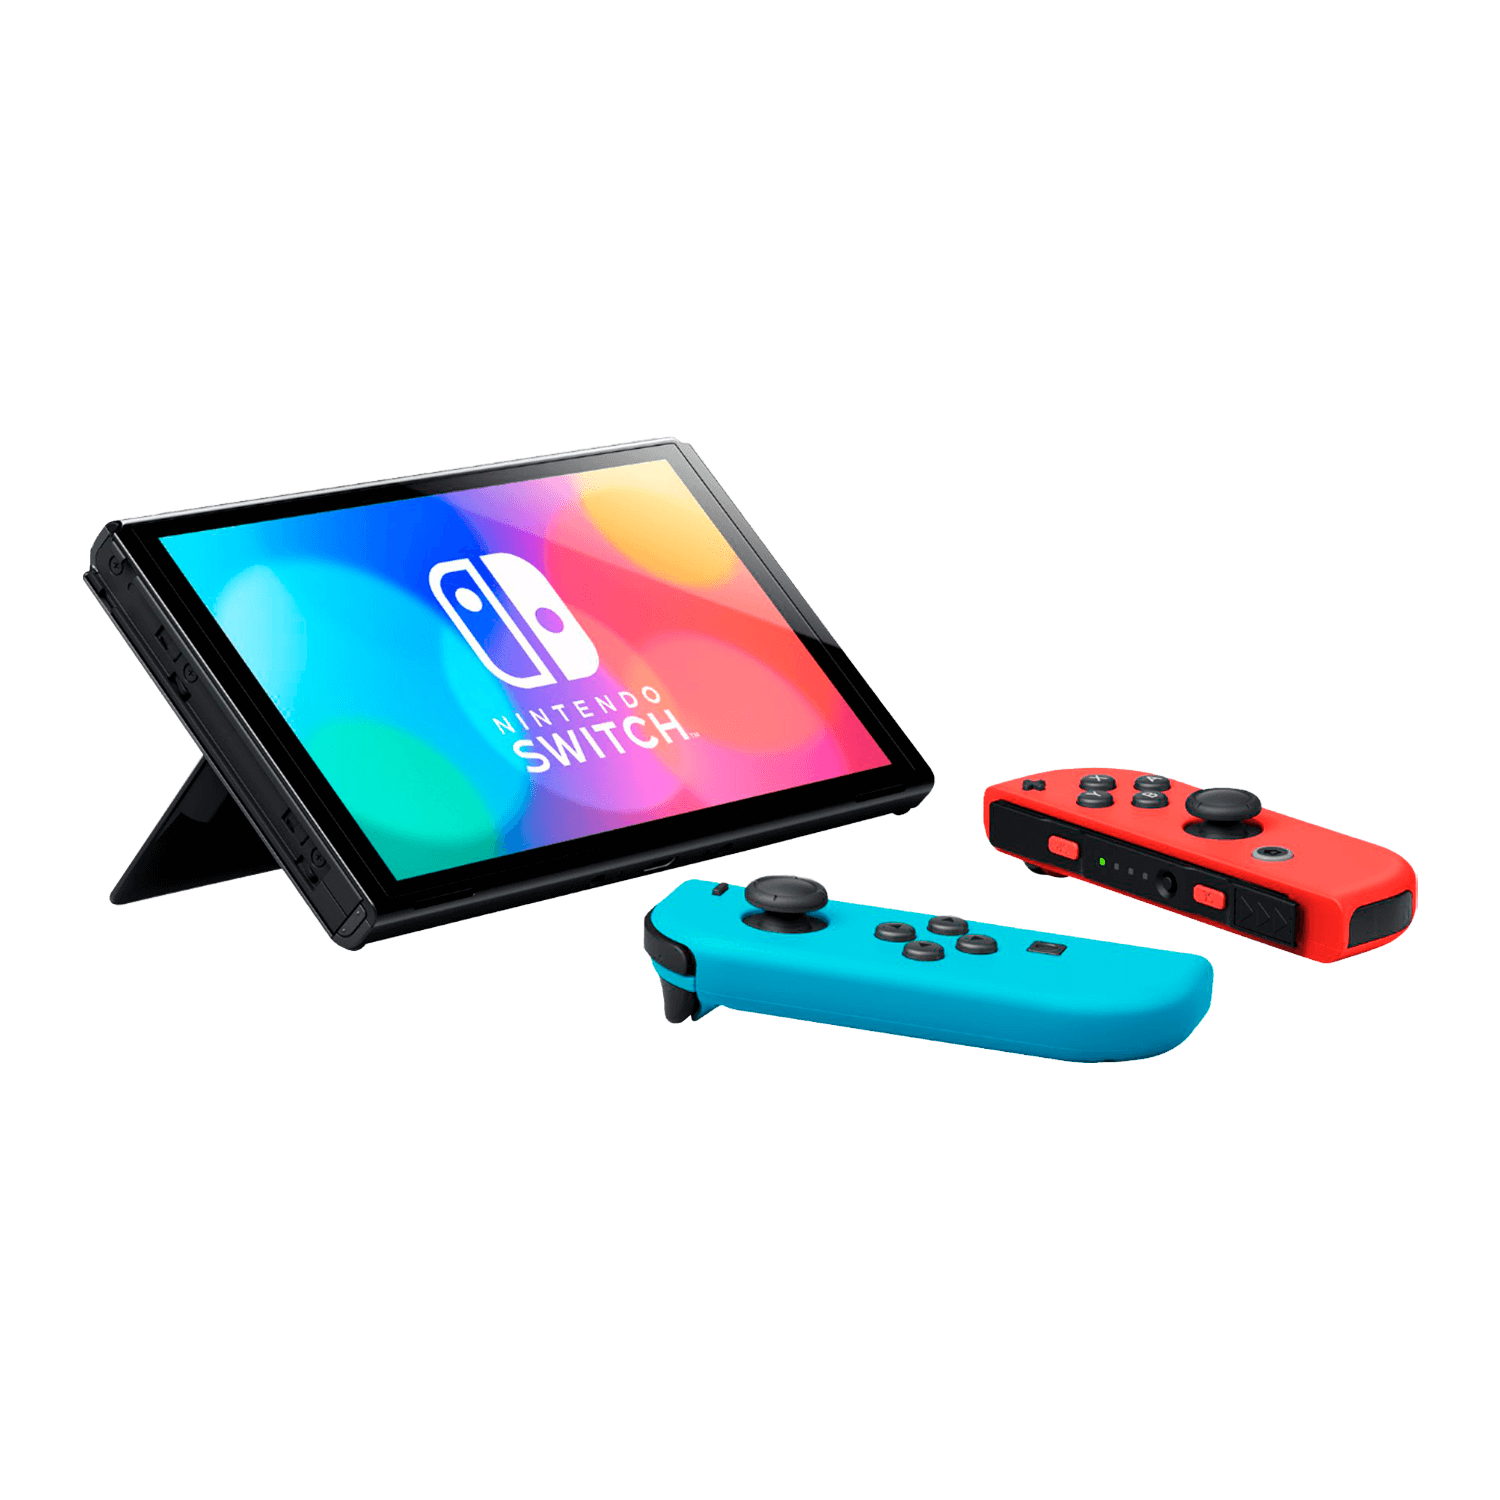 Console Nintendo Switch OLED 64GB Japão- Neon (HEG-S-KABAA)